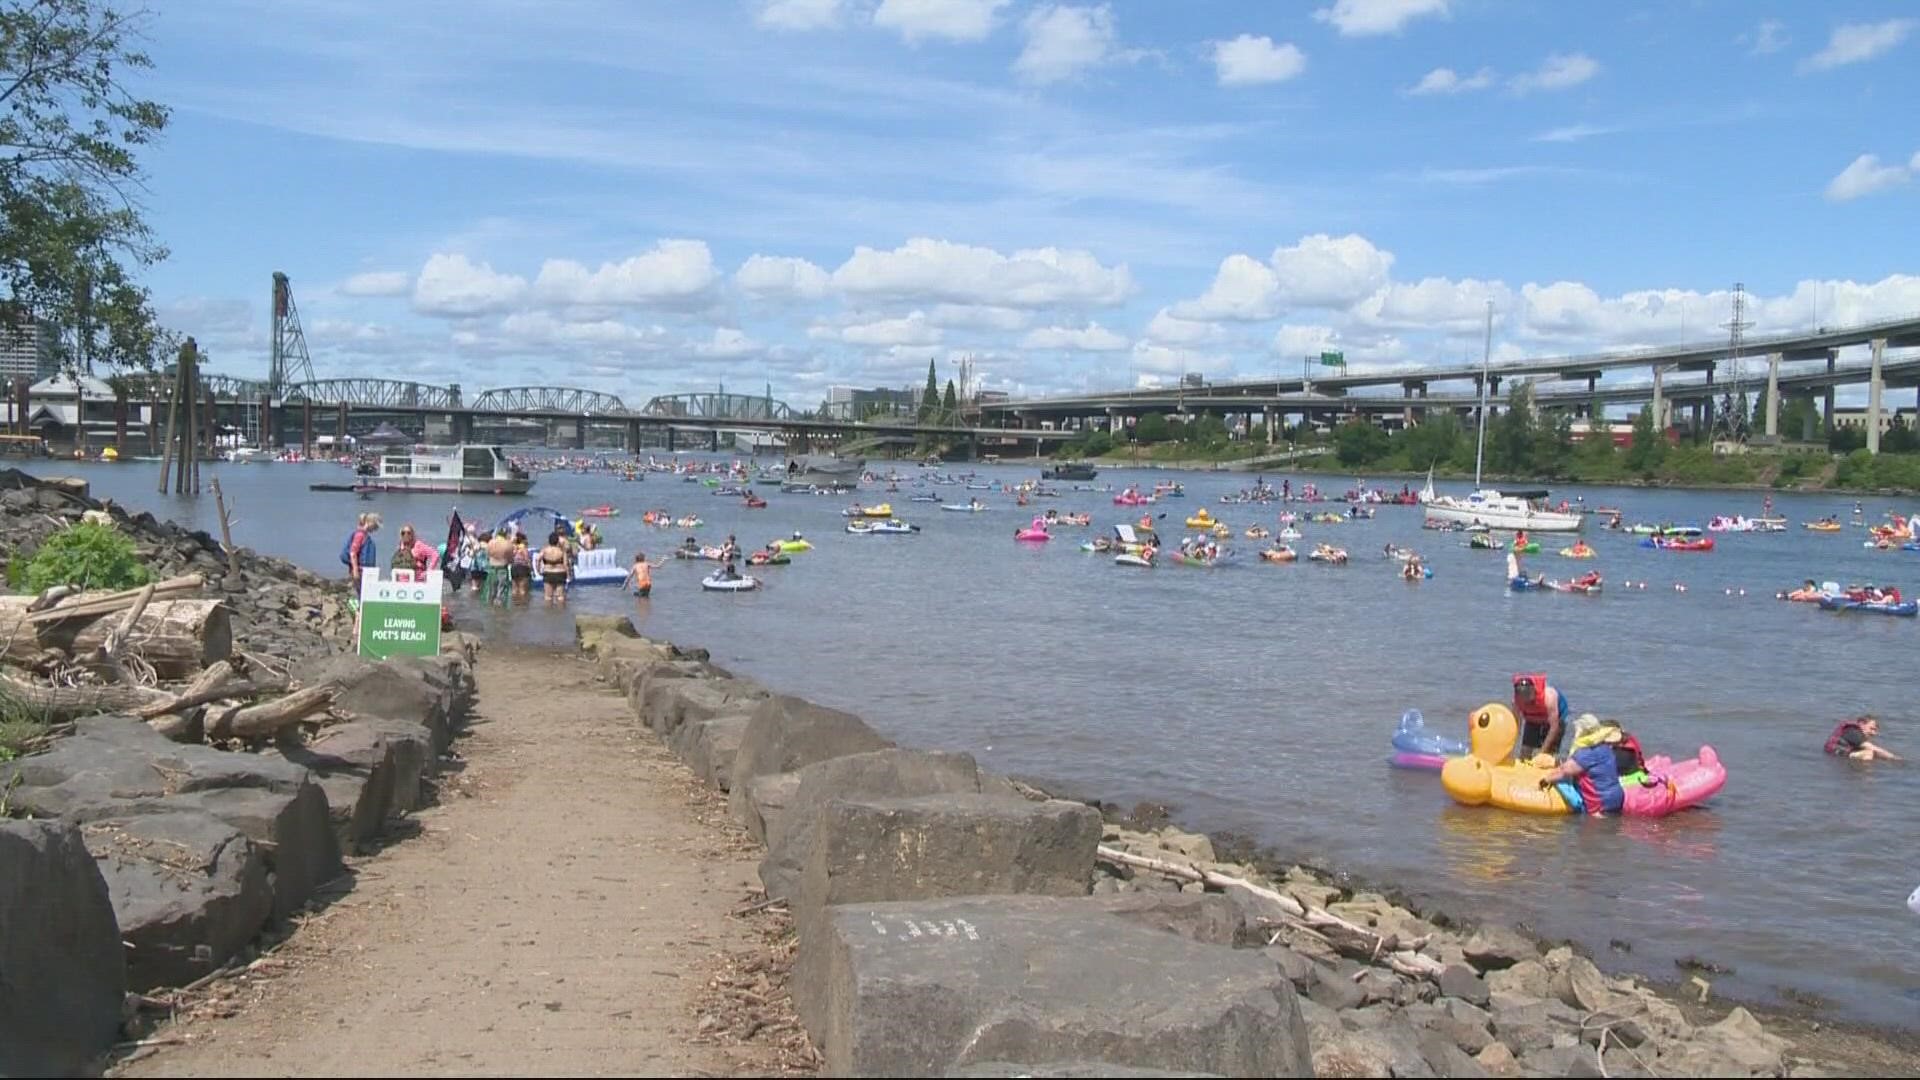 The Big Float will mark its 10th anniversary on Sunday, July 10th on the Willamette River. KGW Sunrise's Drew Carney got a preview of the event.